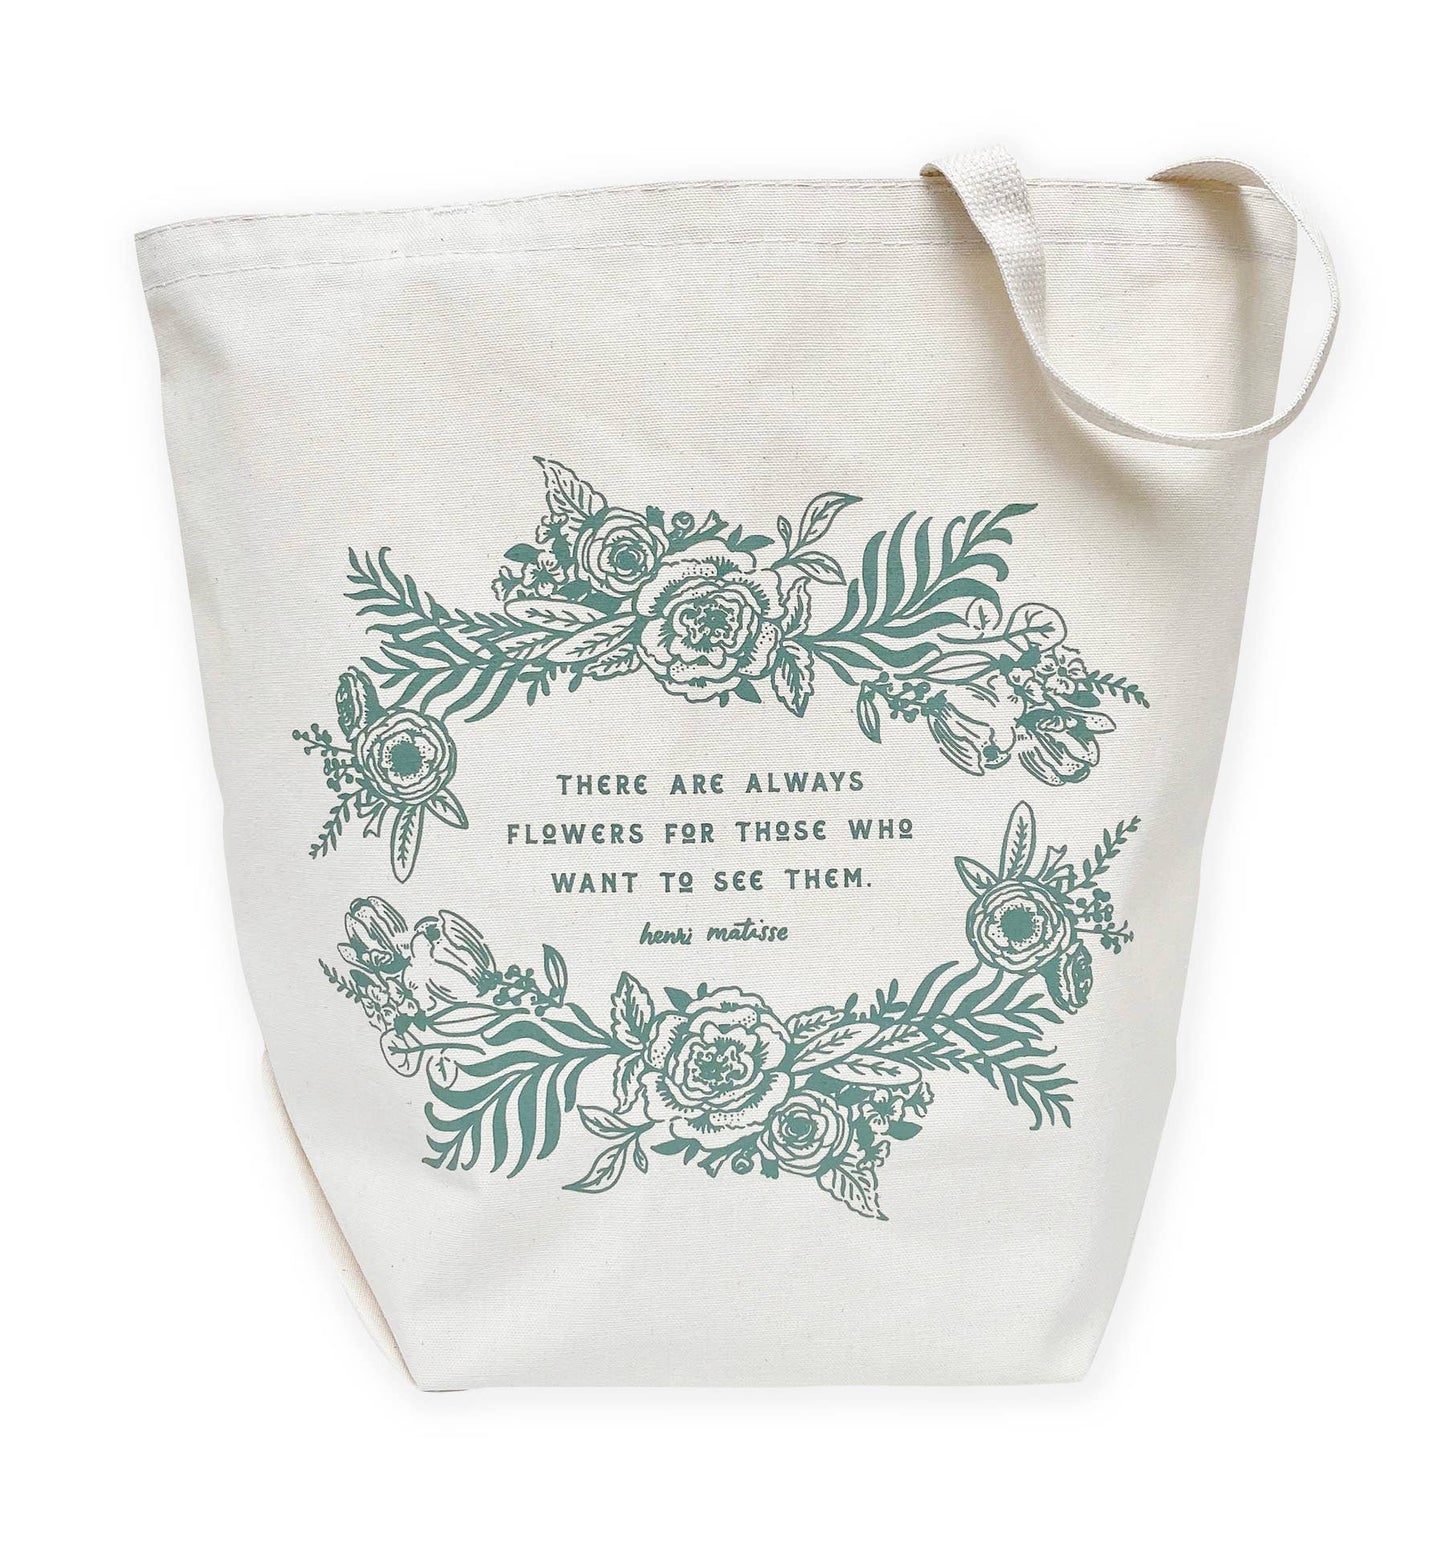 floral matisse quote large market tote